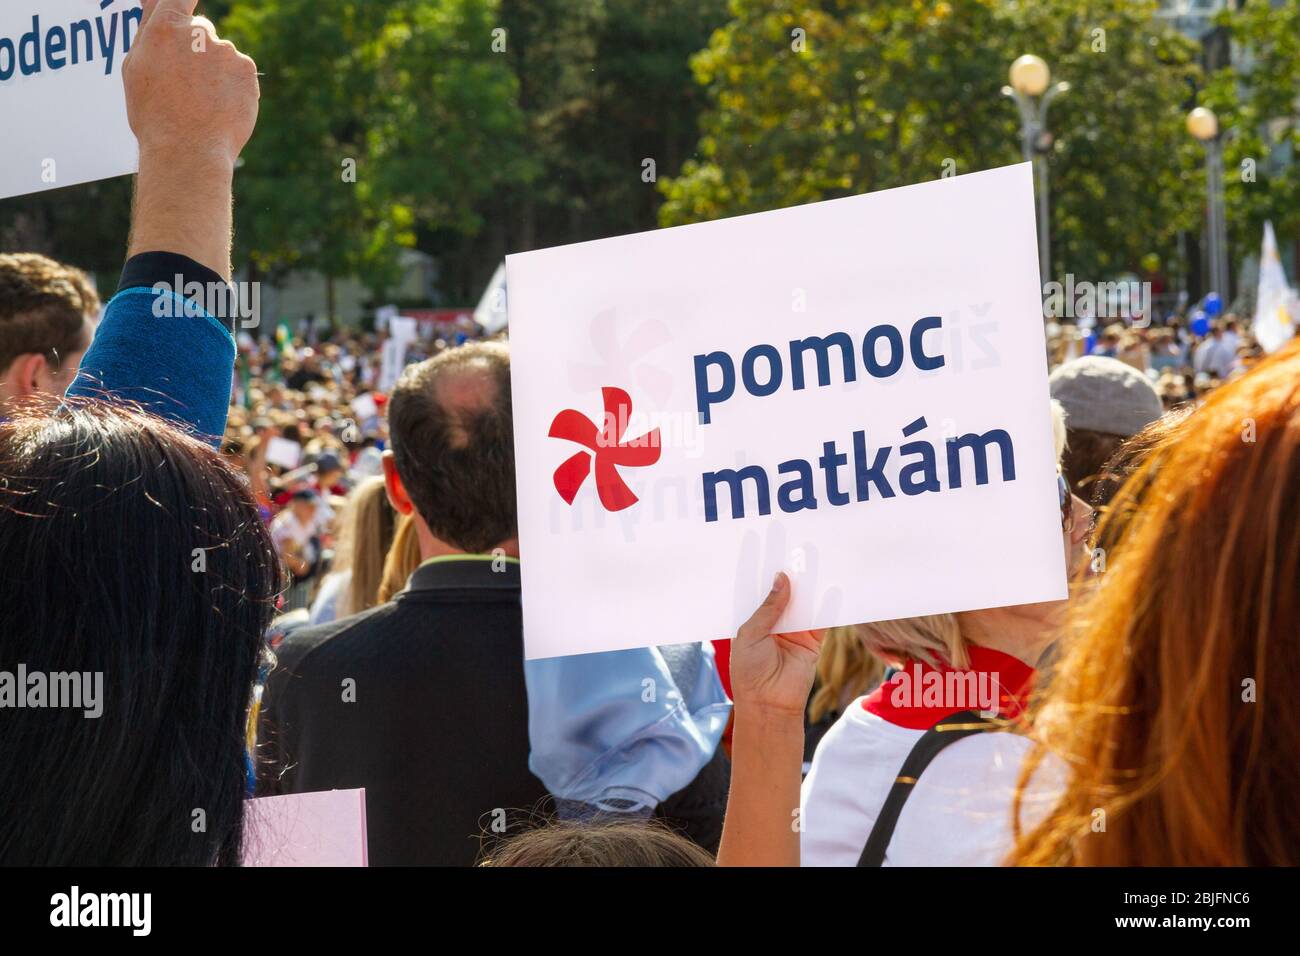 Bratislava, Slovakia. 2019/9/22. A placard with the words 'pomoc matkam' (meaning 'help for mothers' in Slovak) during a March for life. Stock Photo